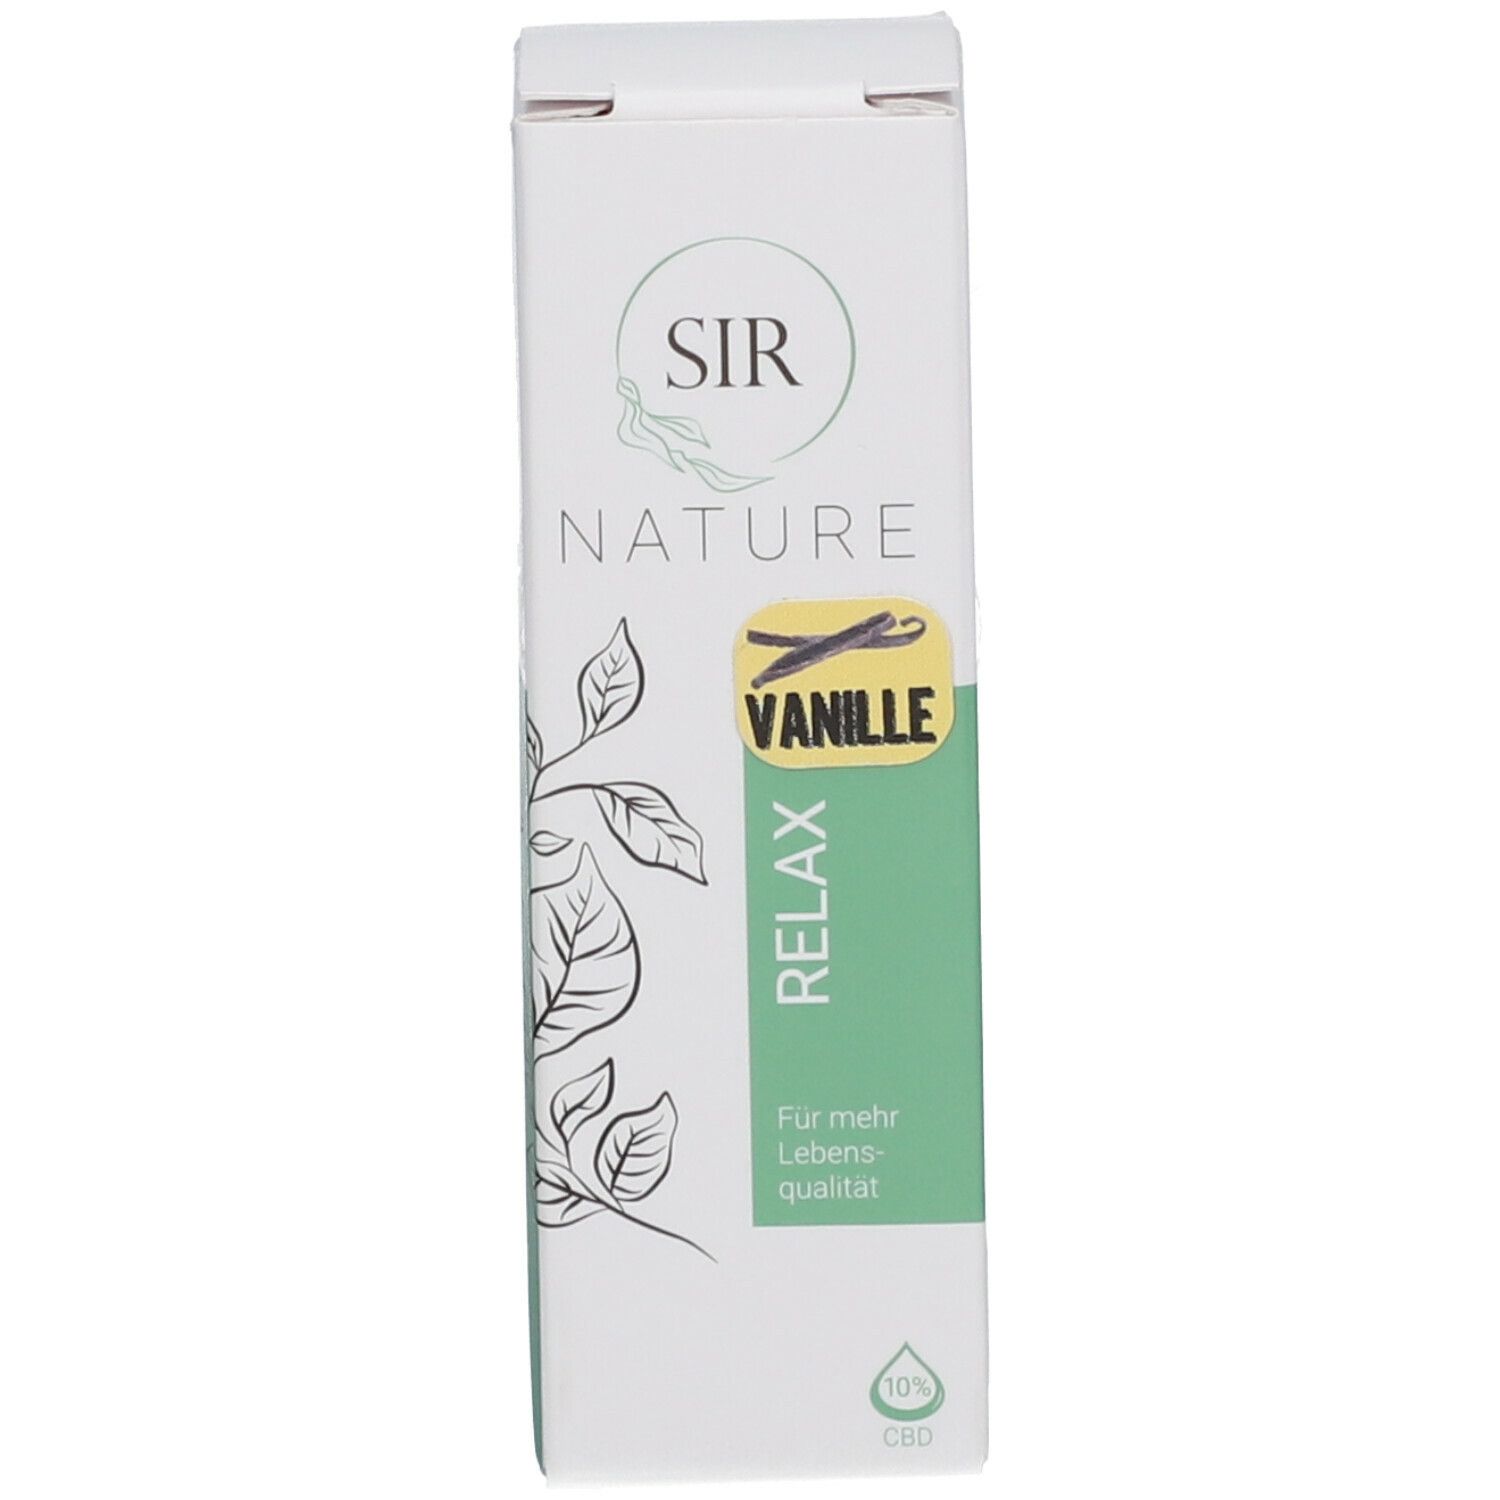 SIR NATURE Relax Vanille 10 %